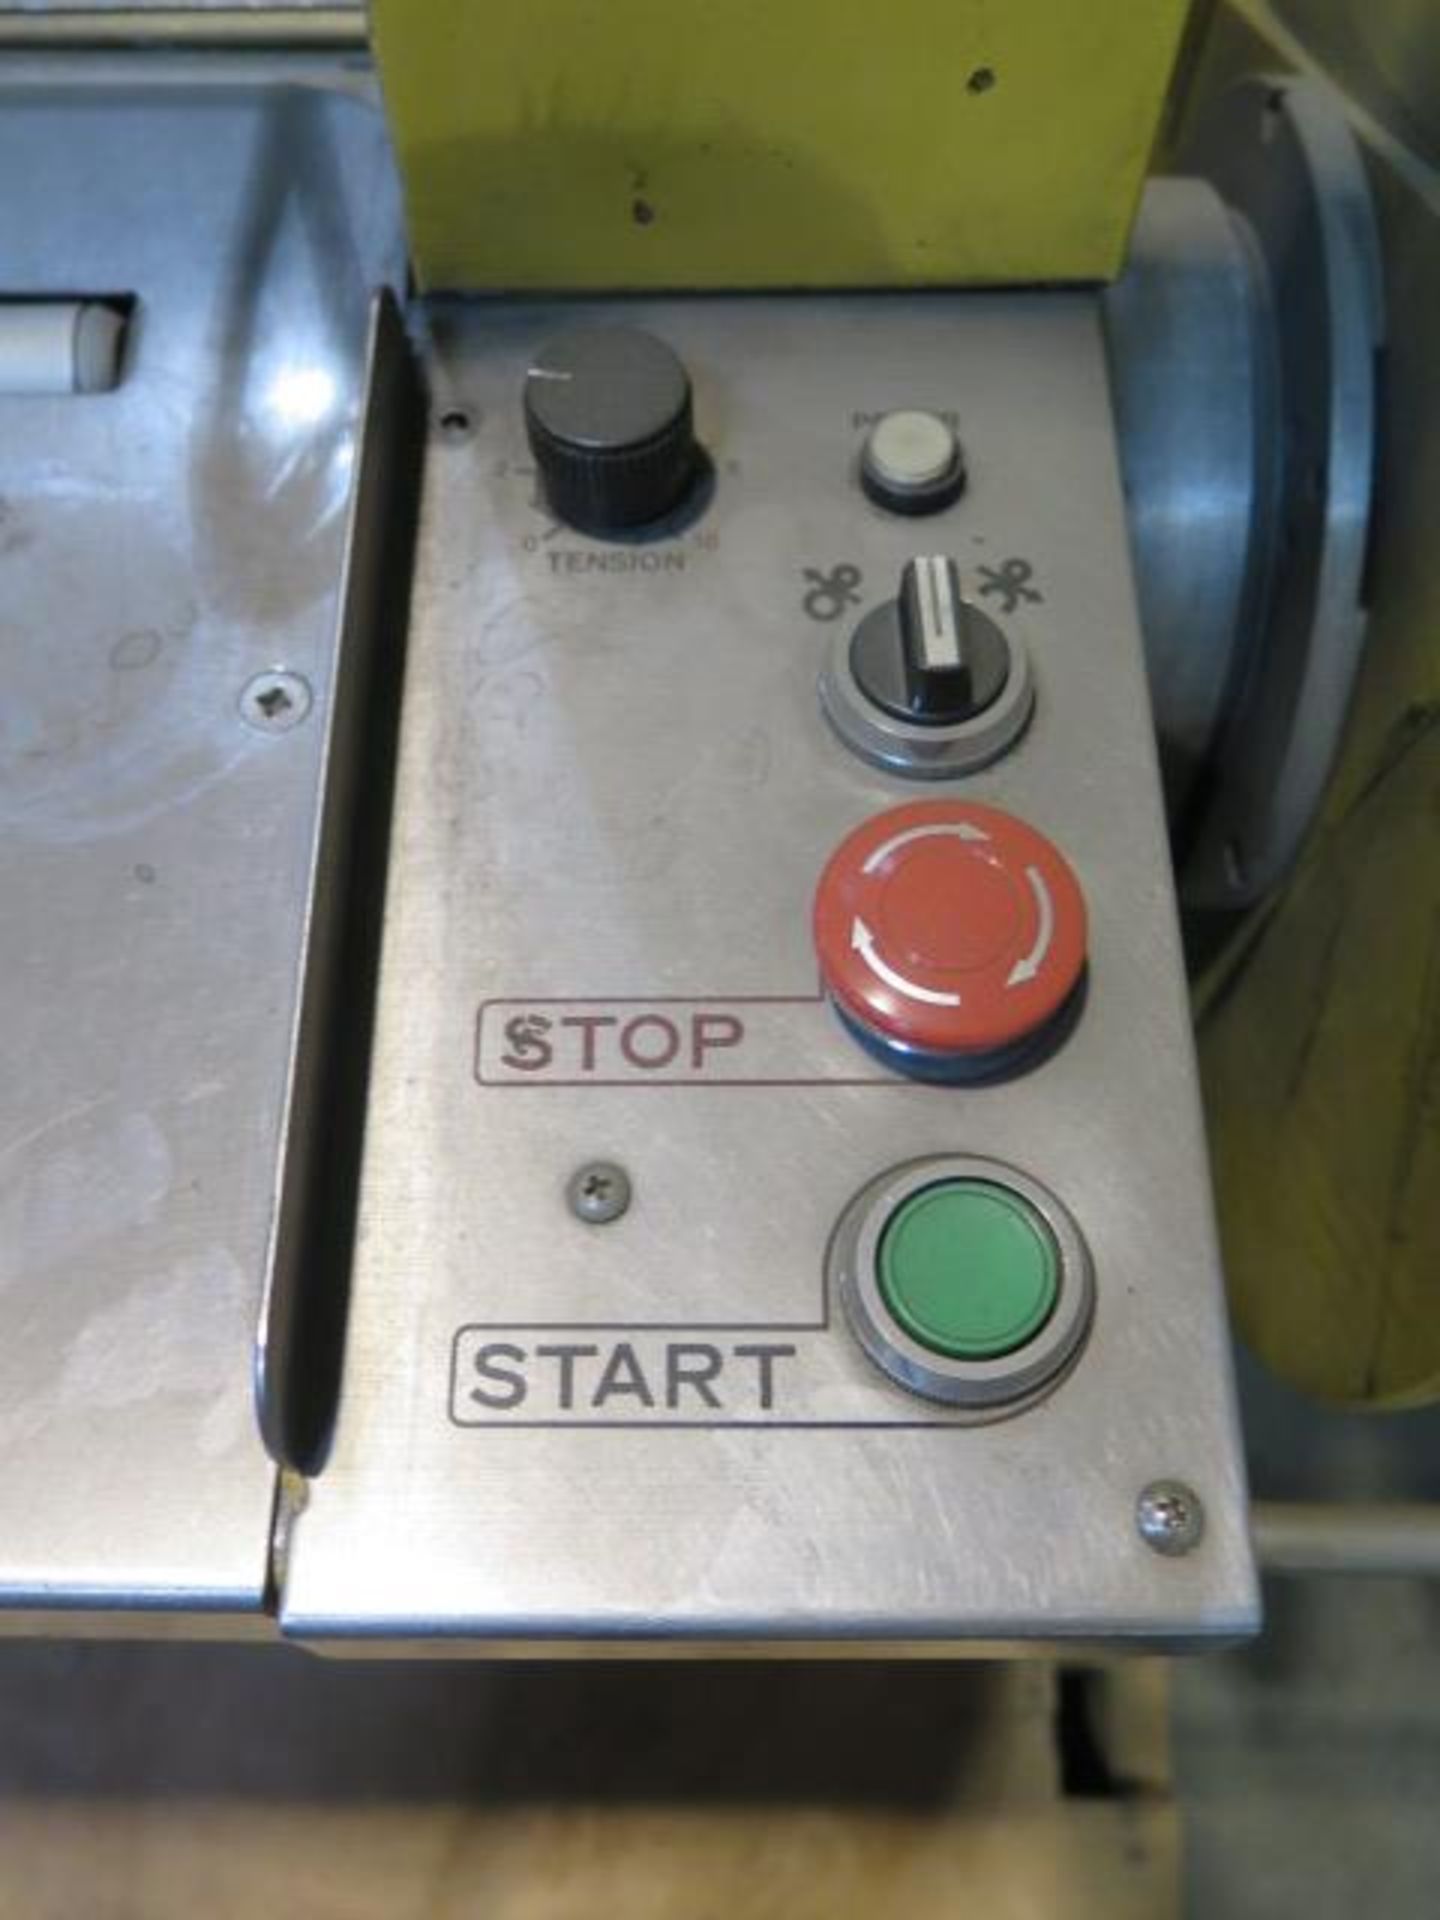 2005 StraPack RQ-8 Automatic Carton Strapping Machine s/n 27218205 (SOLD AS-IS - NO WARRANTY) - Image 6 of 9